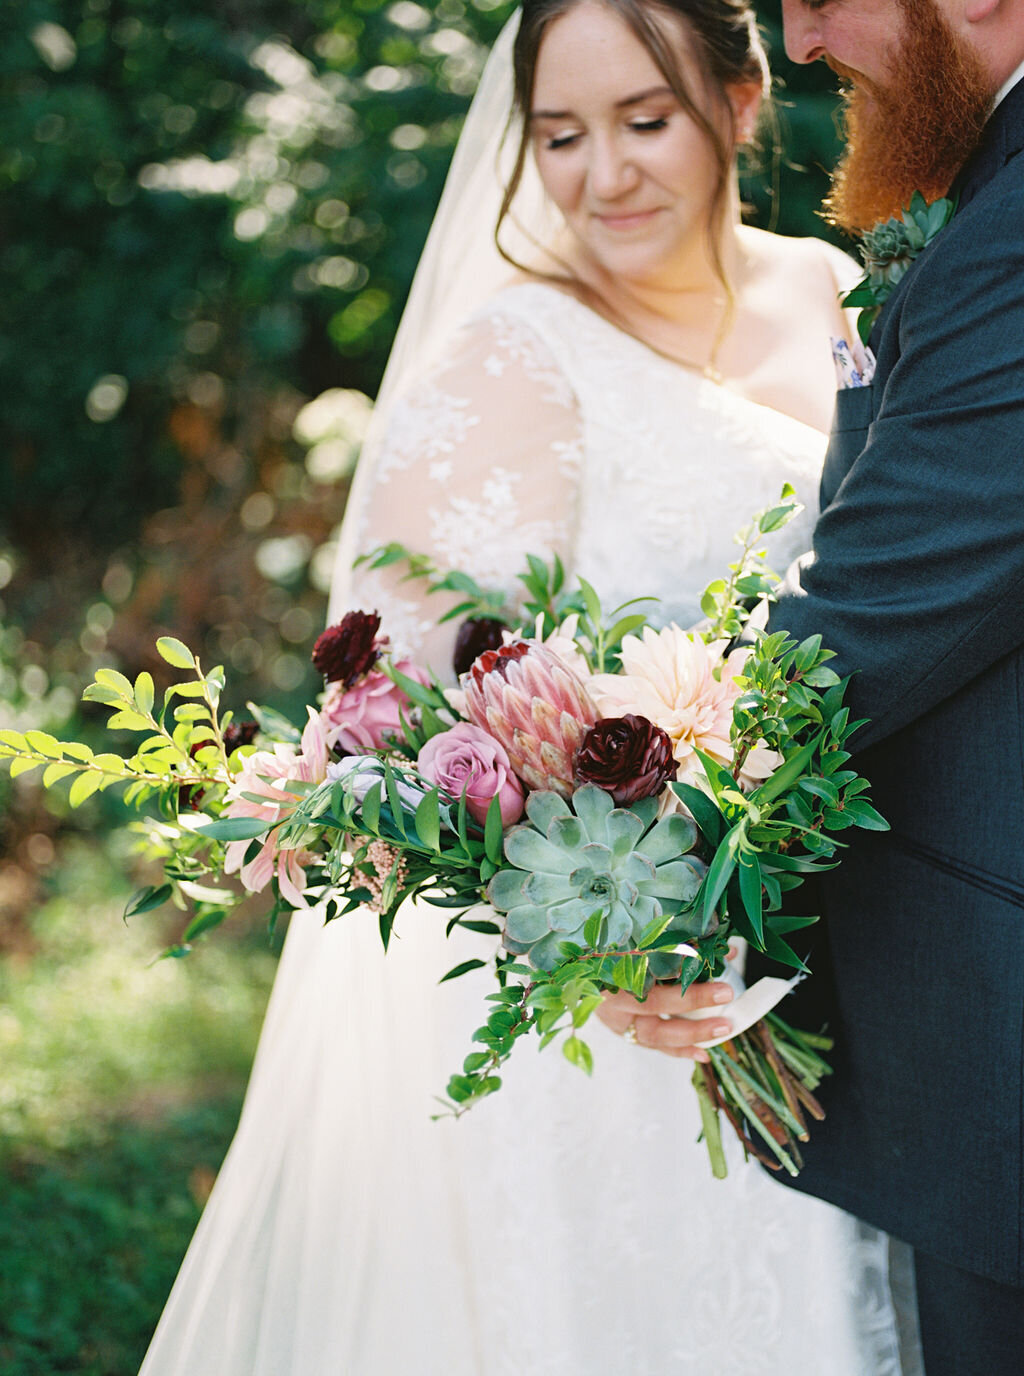 West Lafayette ecclectic wedding with rich colors by Burman Photography106